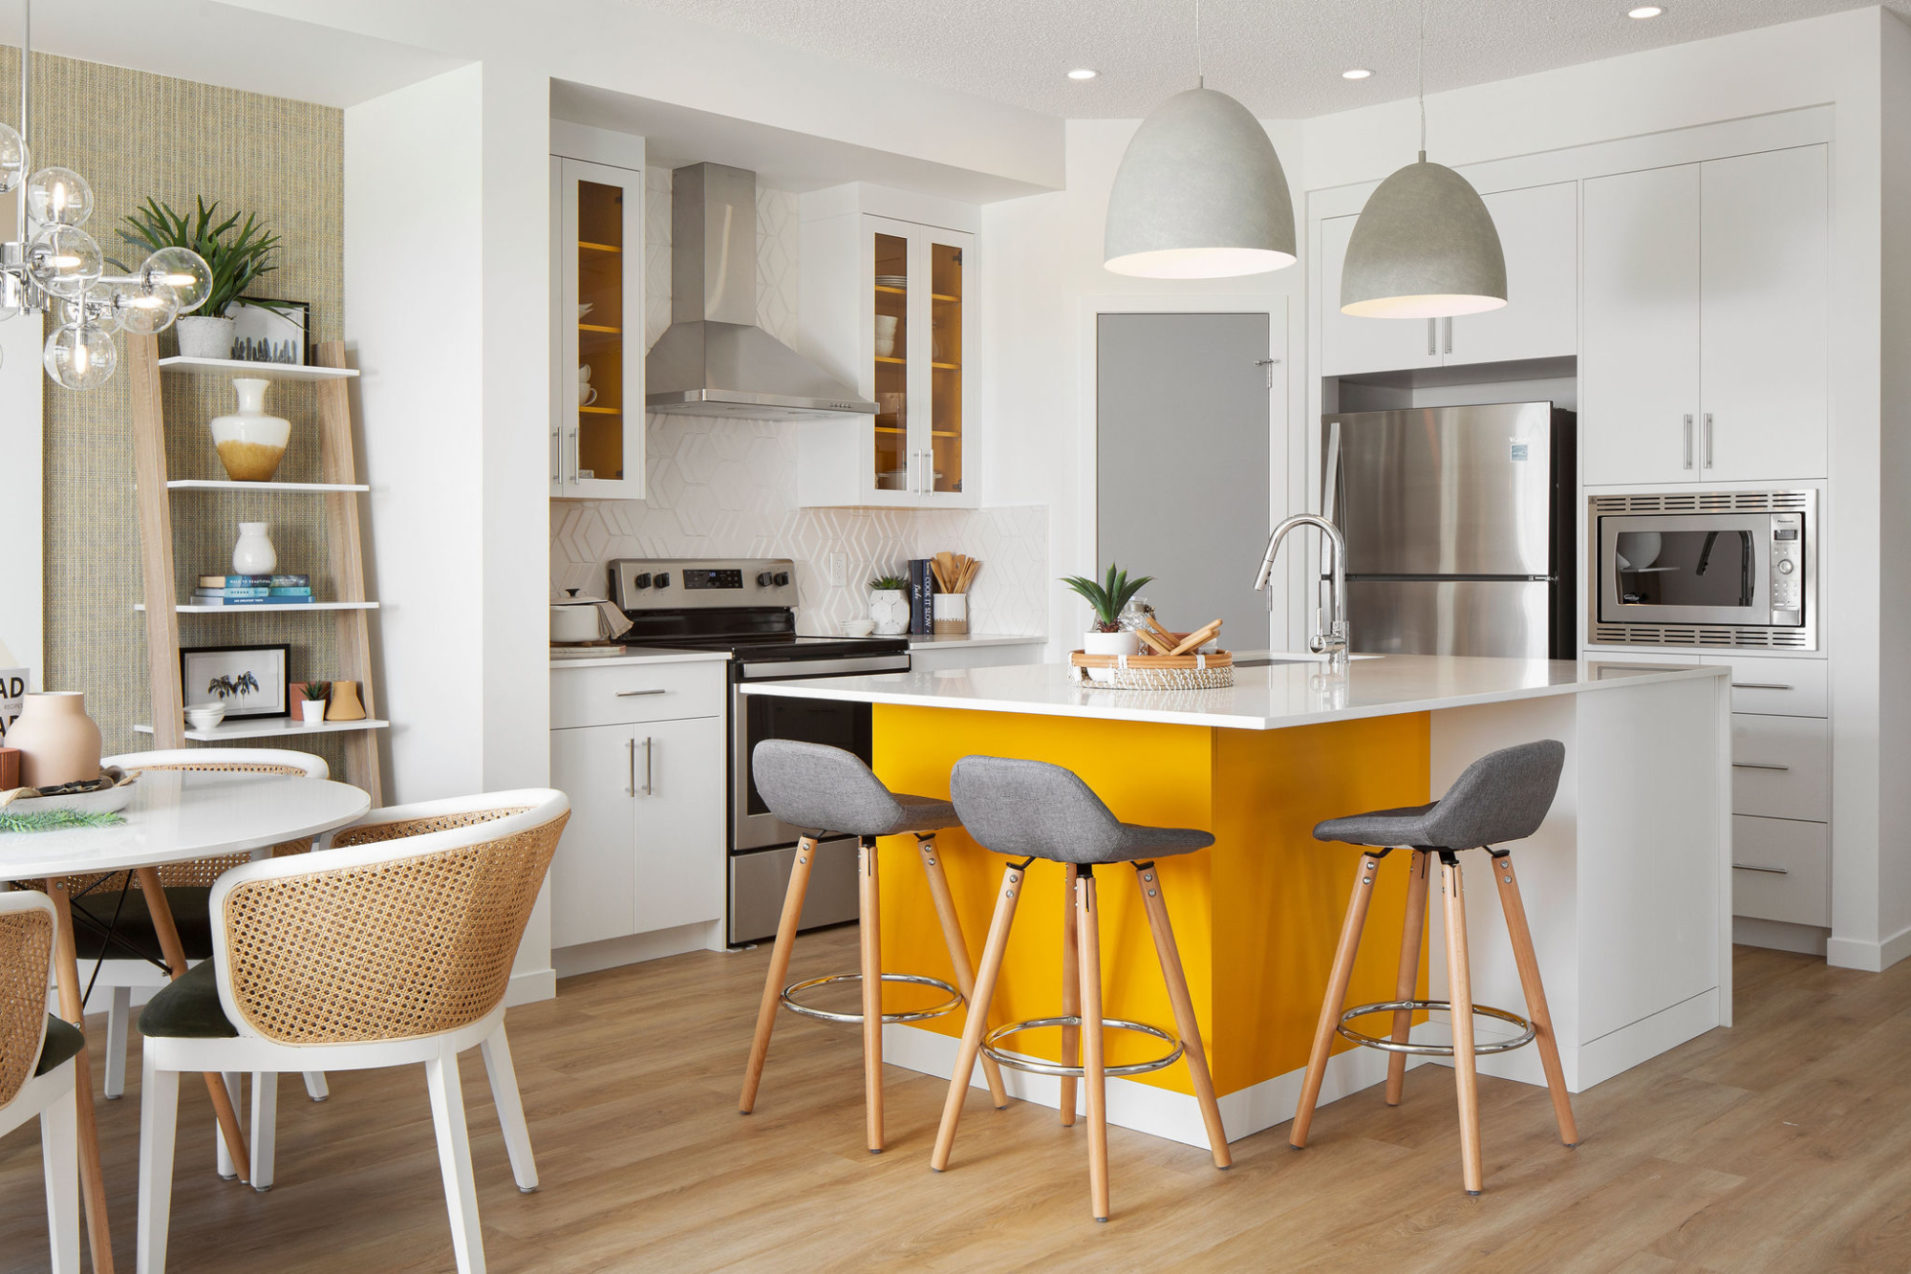 A kitchen with white cabinets, light wood floors, and yellow island.